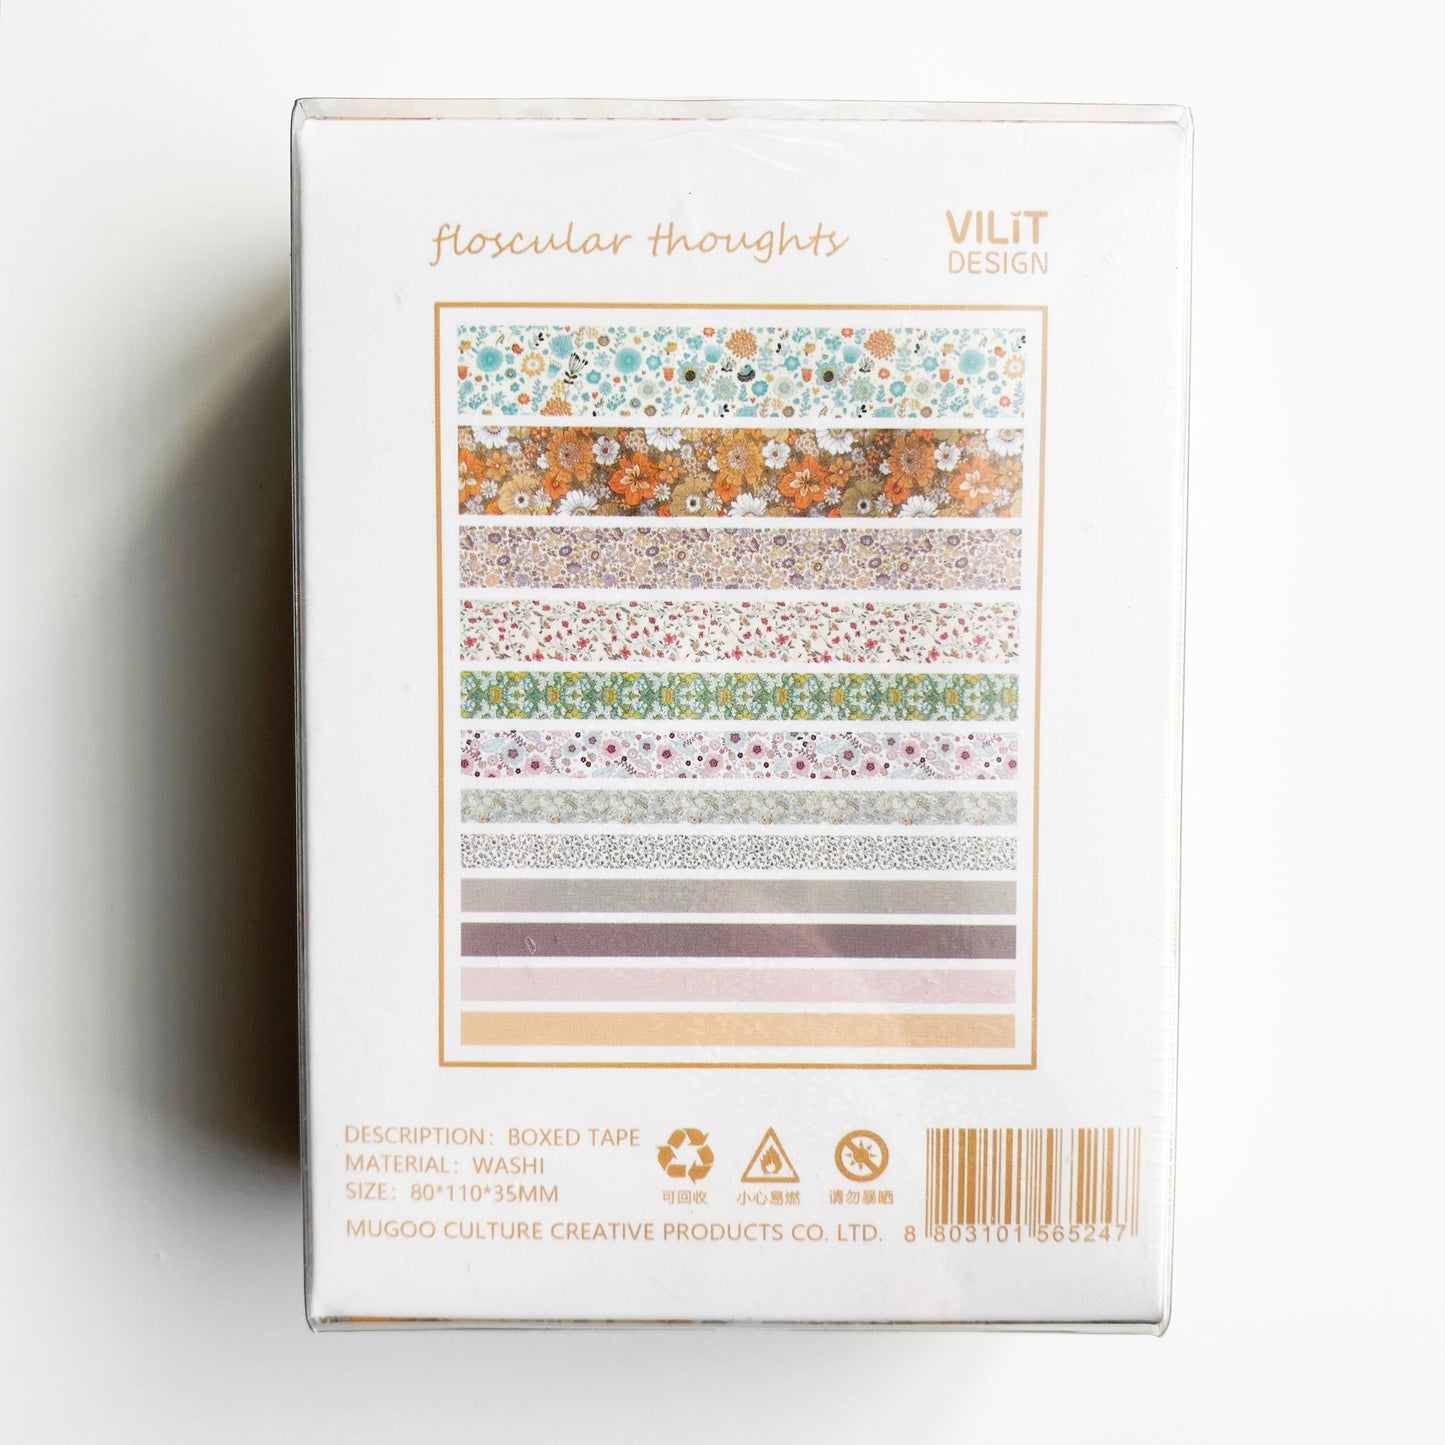 A8_Floral Thoughts_12 rolls Washi tape set